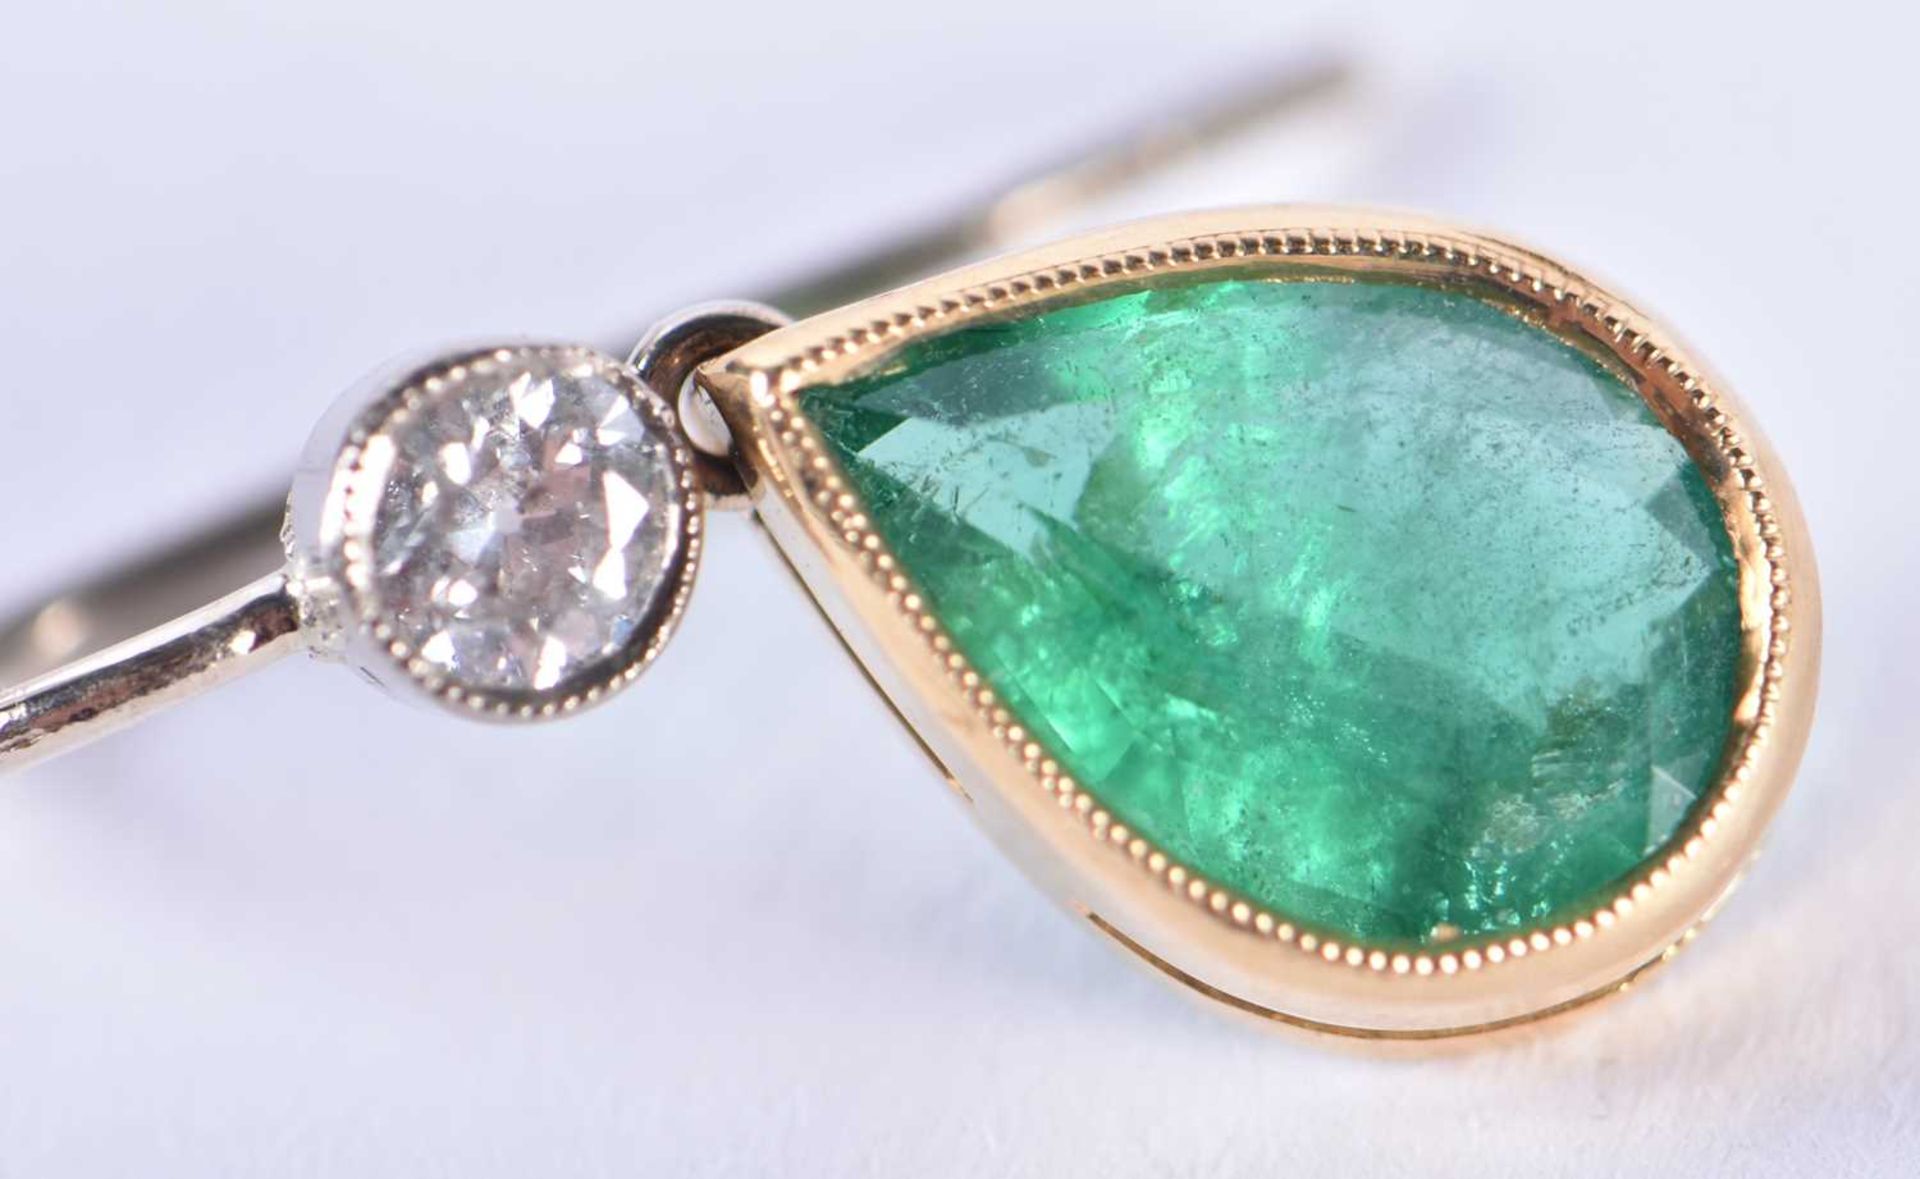 A PAIR OF 18CT GOLD DIAMOND AND EMERALD EARRINGS each emerald 10 mm x 8 mm and approx 1.25 cts each. - Image 5 of 8